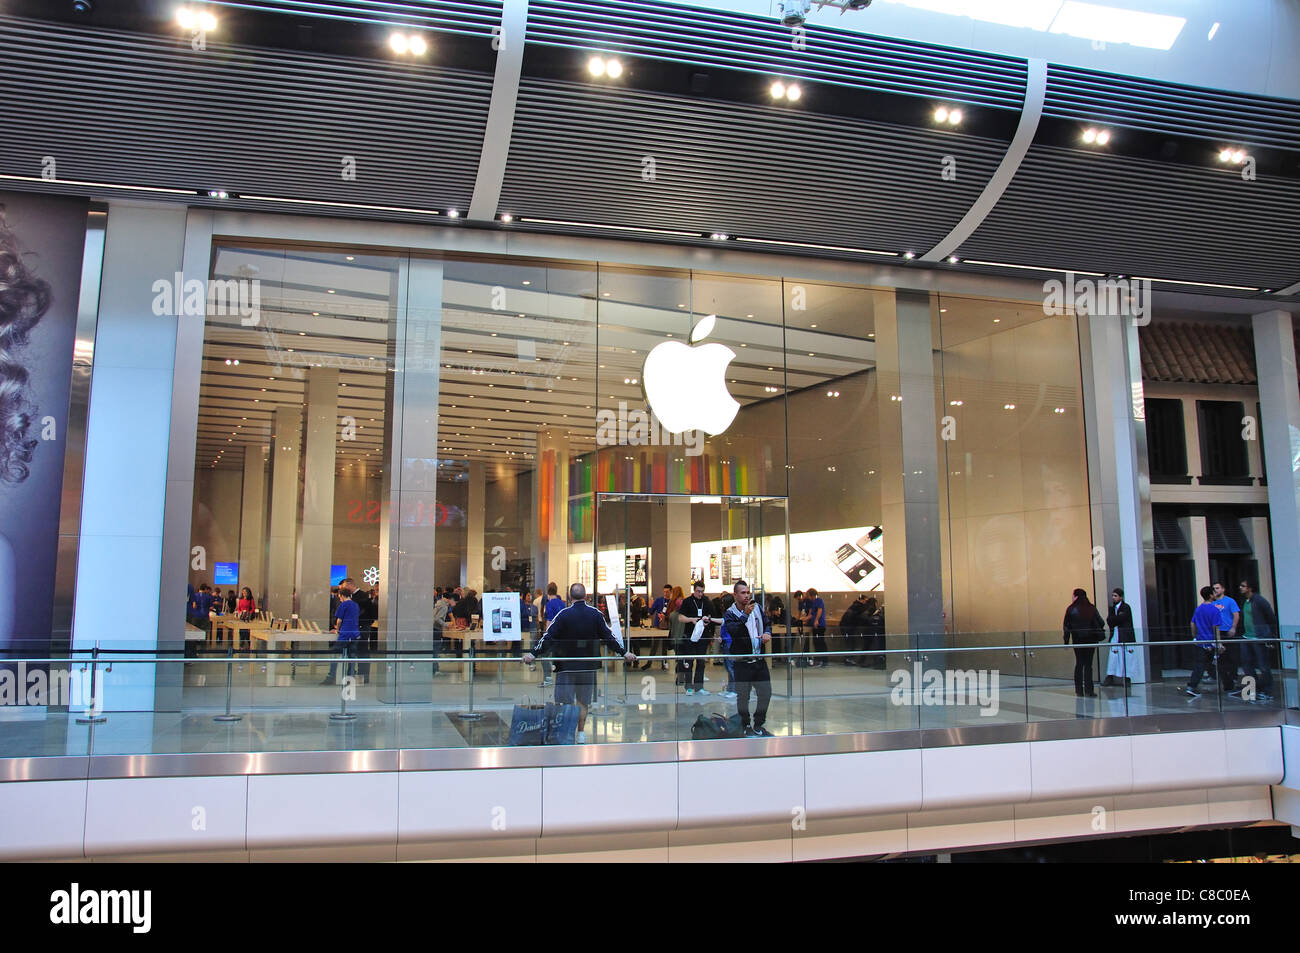 Apple store, Westfield Shopping Centre, Stratford City, Stratford, London Borough of Newham, Greater London, England, United Kingdom Stock Photo